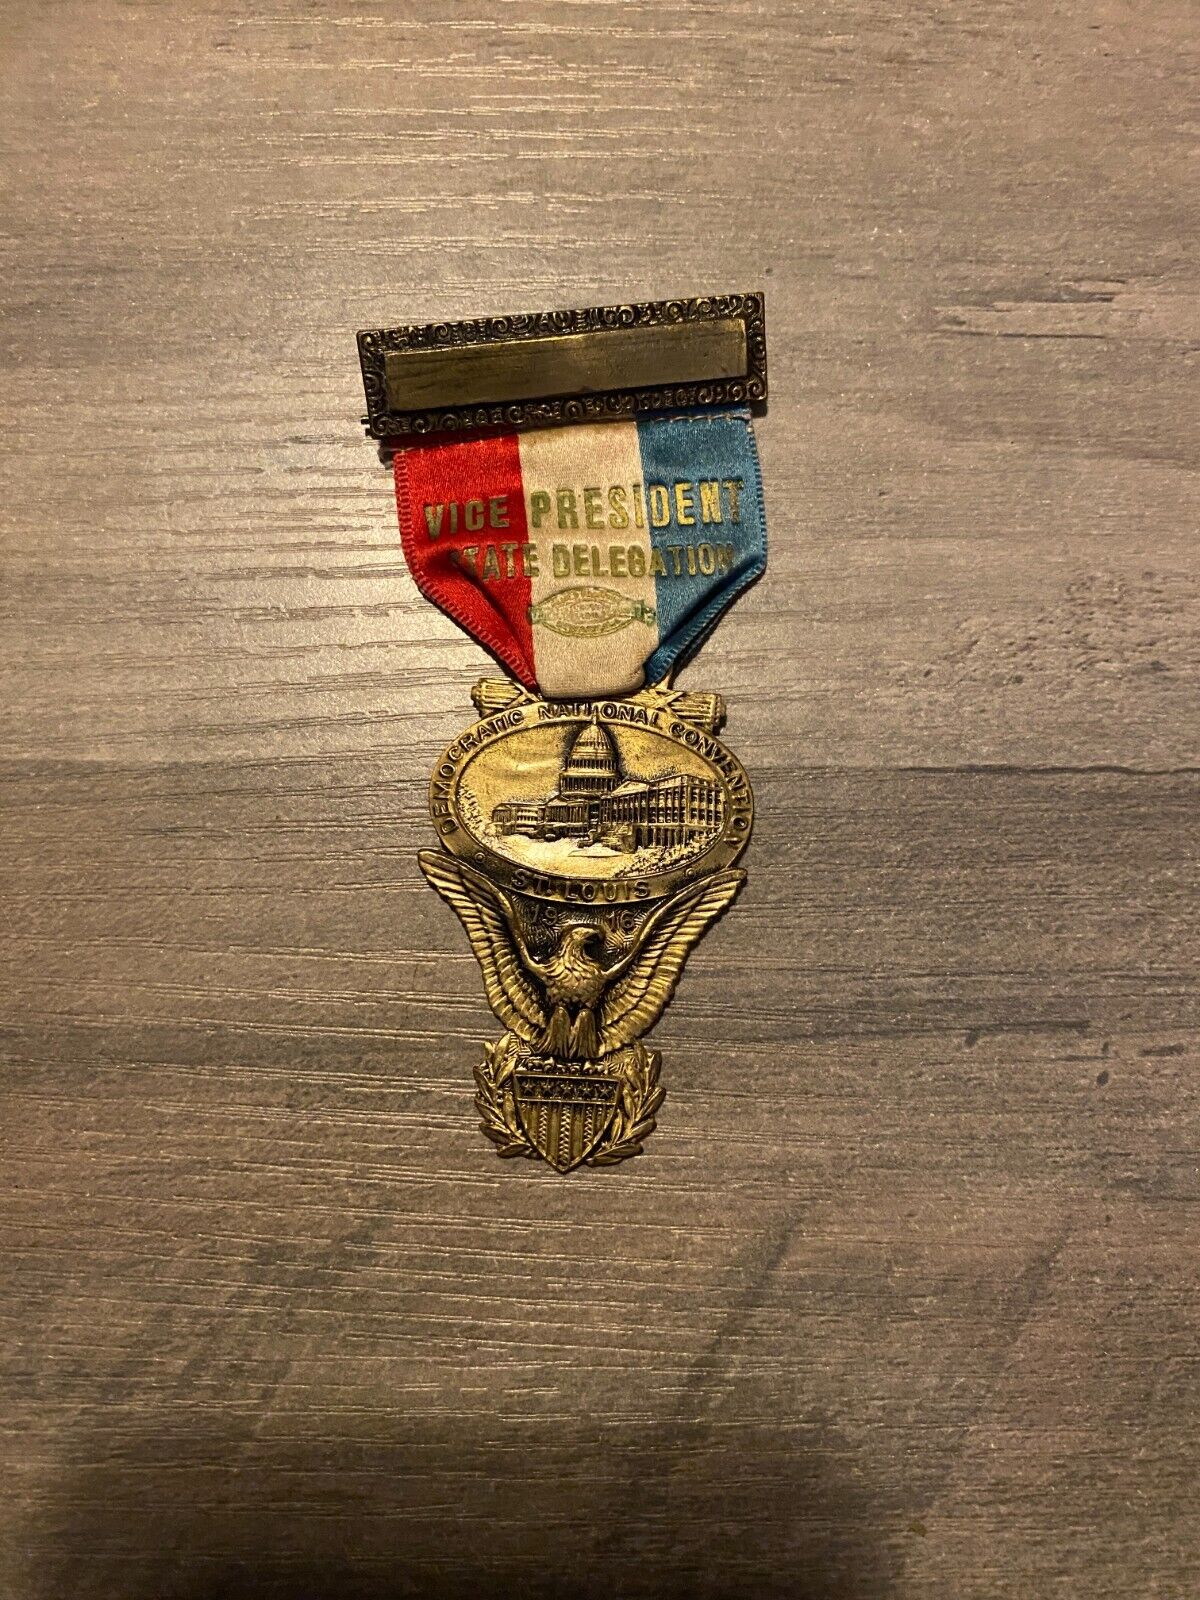 1916 Democratic National Convention Vice President State Delegation Badge Pin